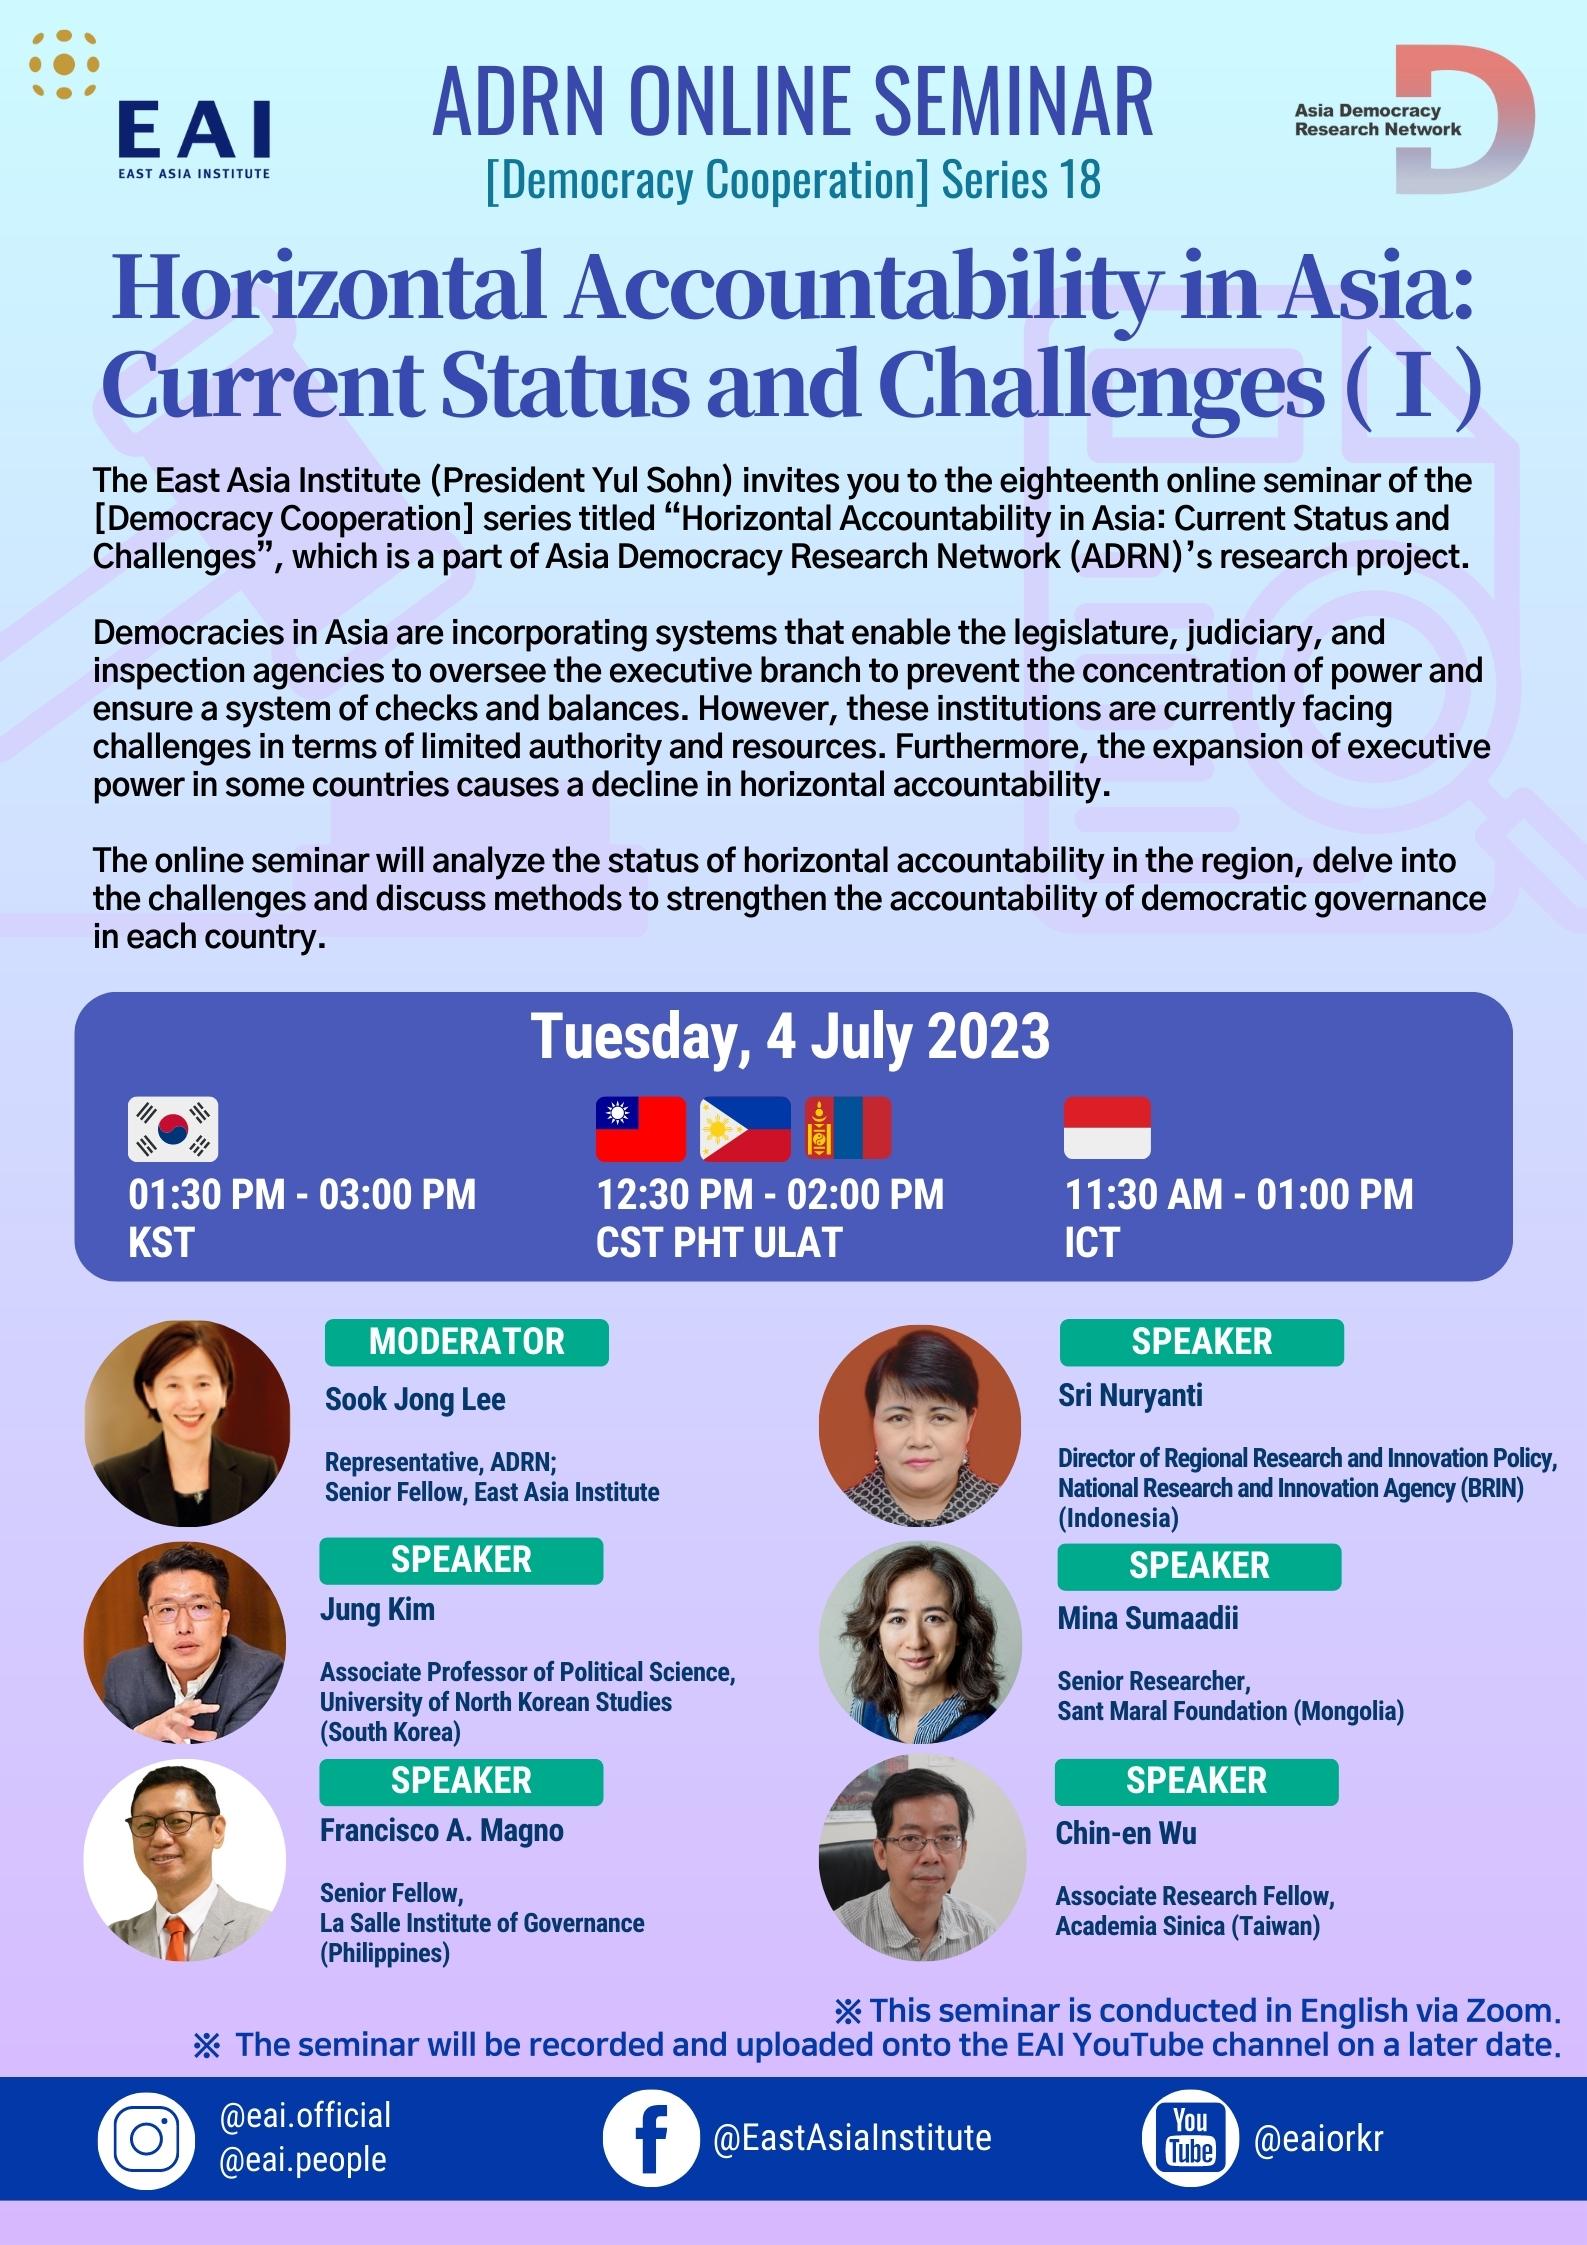 [ADRN Online Seminar] Horizontal Accountability in Asia: Current Status and Challenges (Ⅰ)